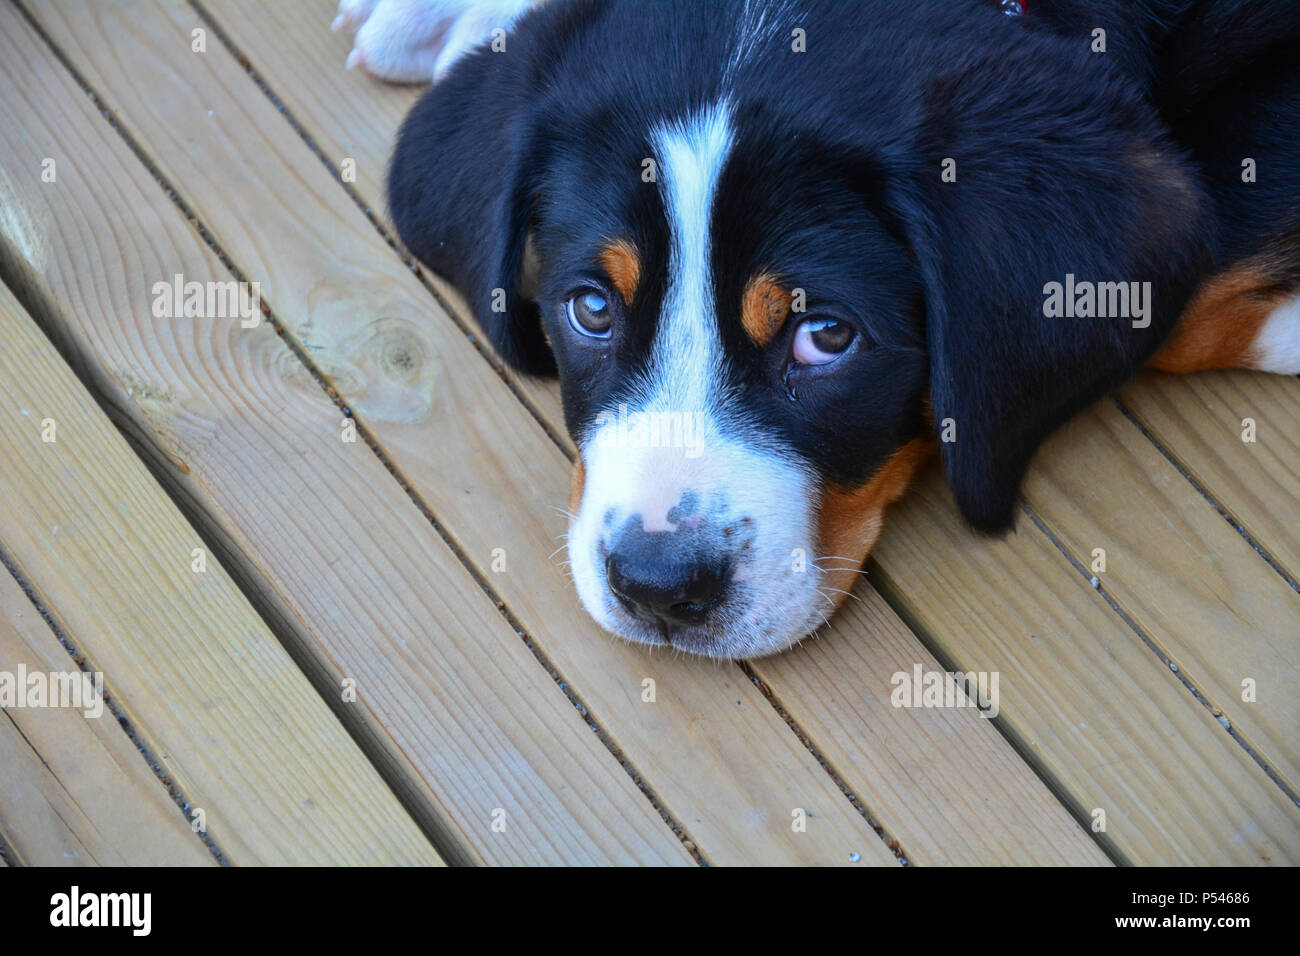 Swiss mountain dog puppy lying on a wooden deck looking up at the camera with puppy eyes Stock Photo